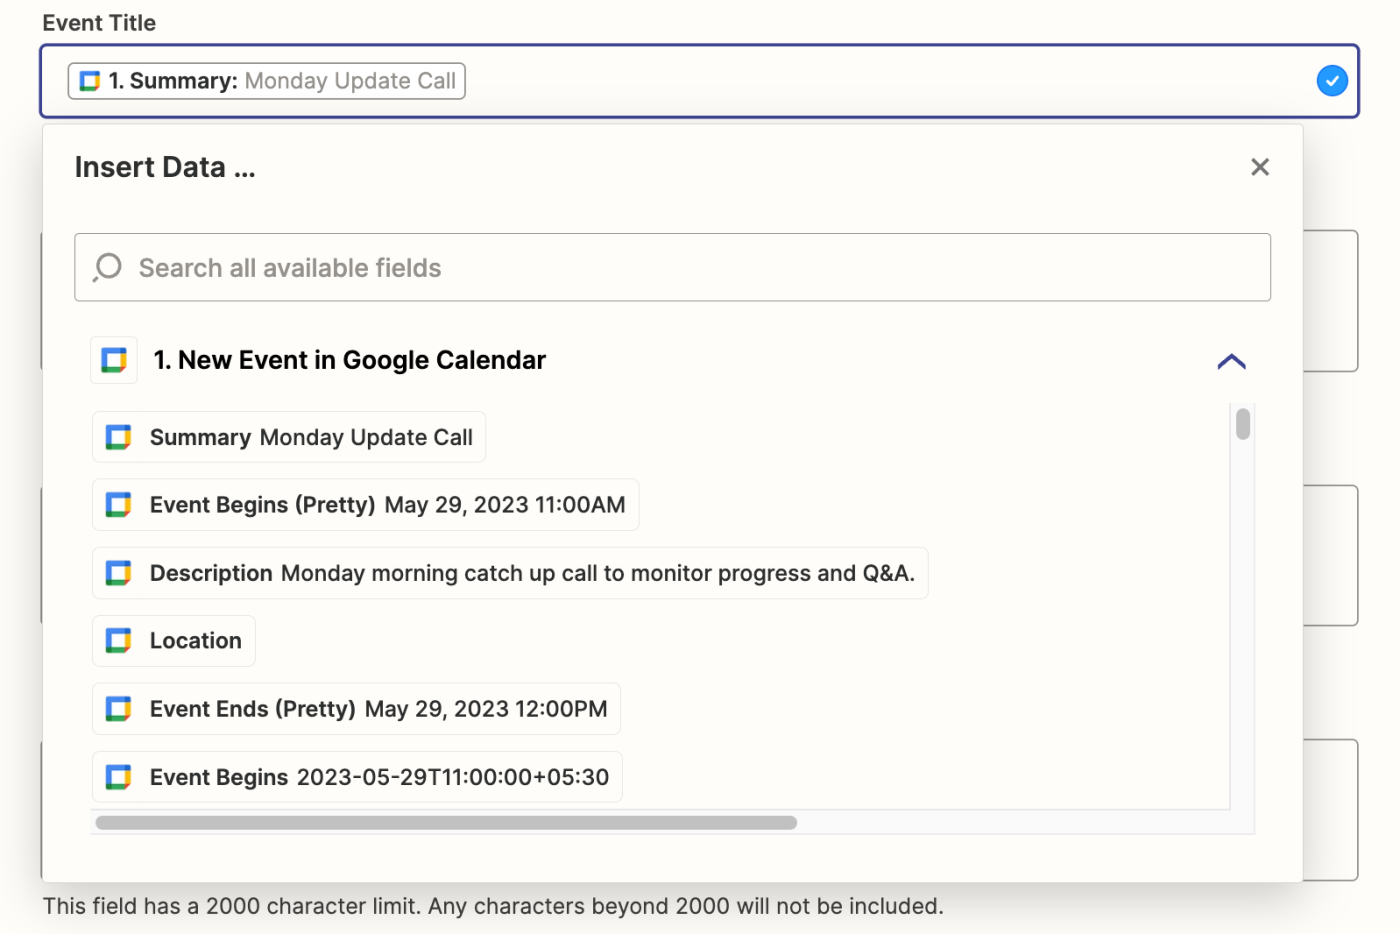 An Insert Data dropdown with a list of Google Calendar data that can be added to the Event Title field.